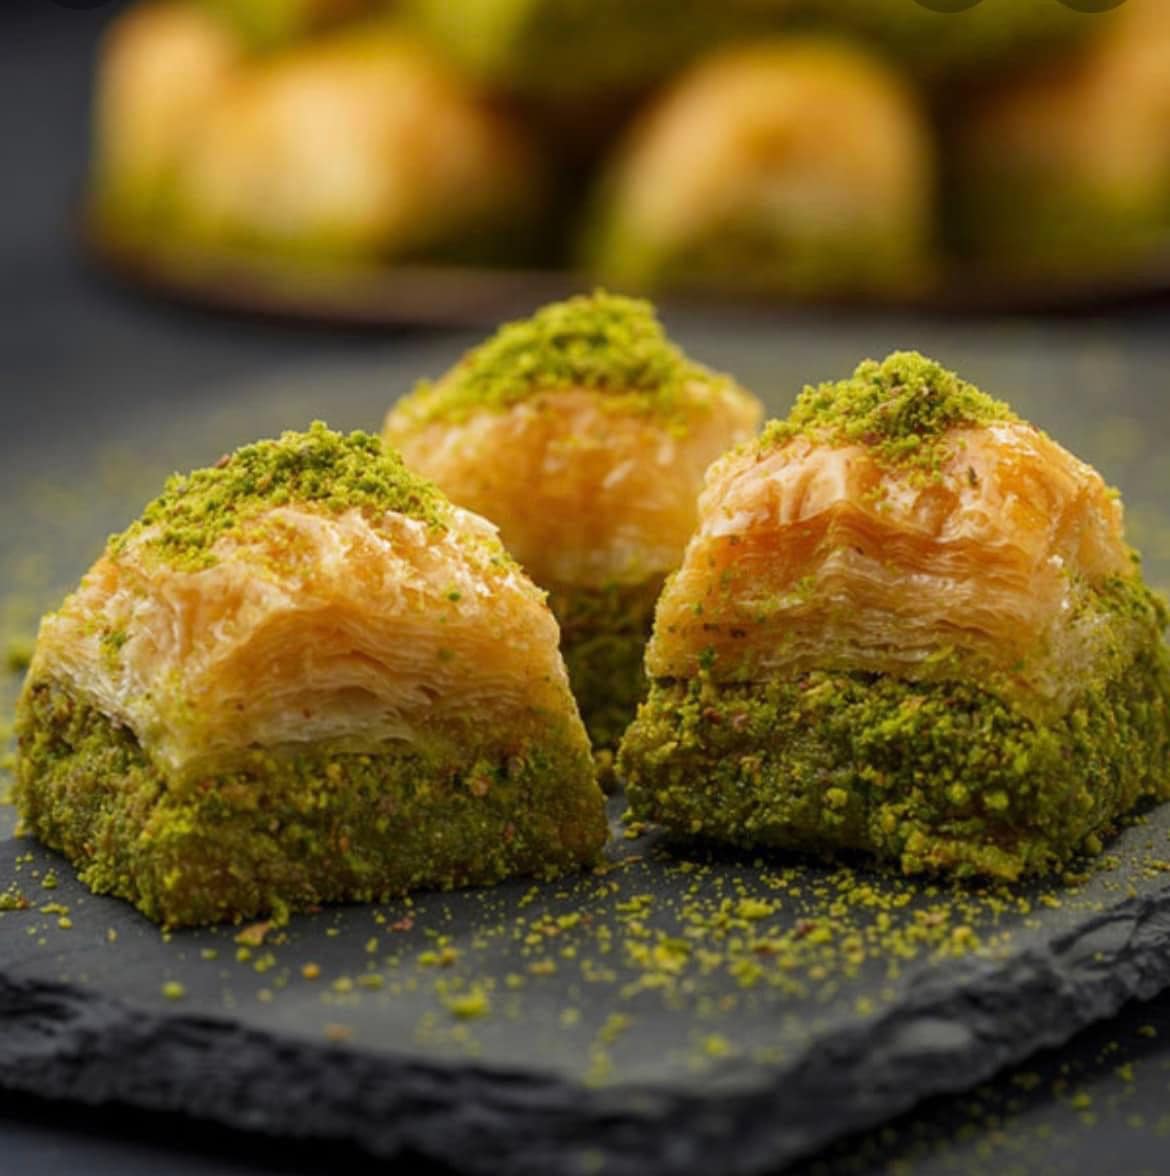 Damascus Sweets